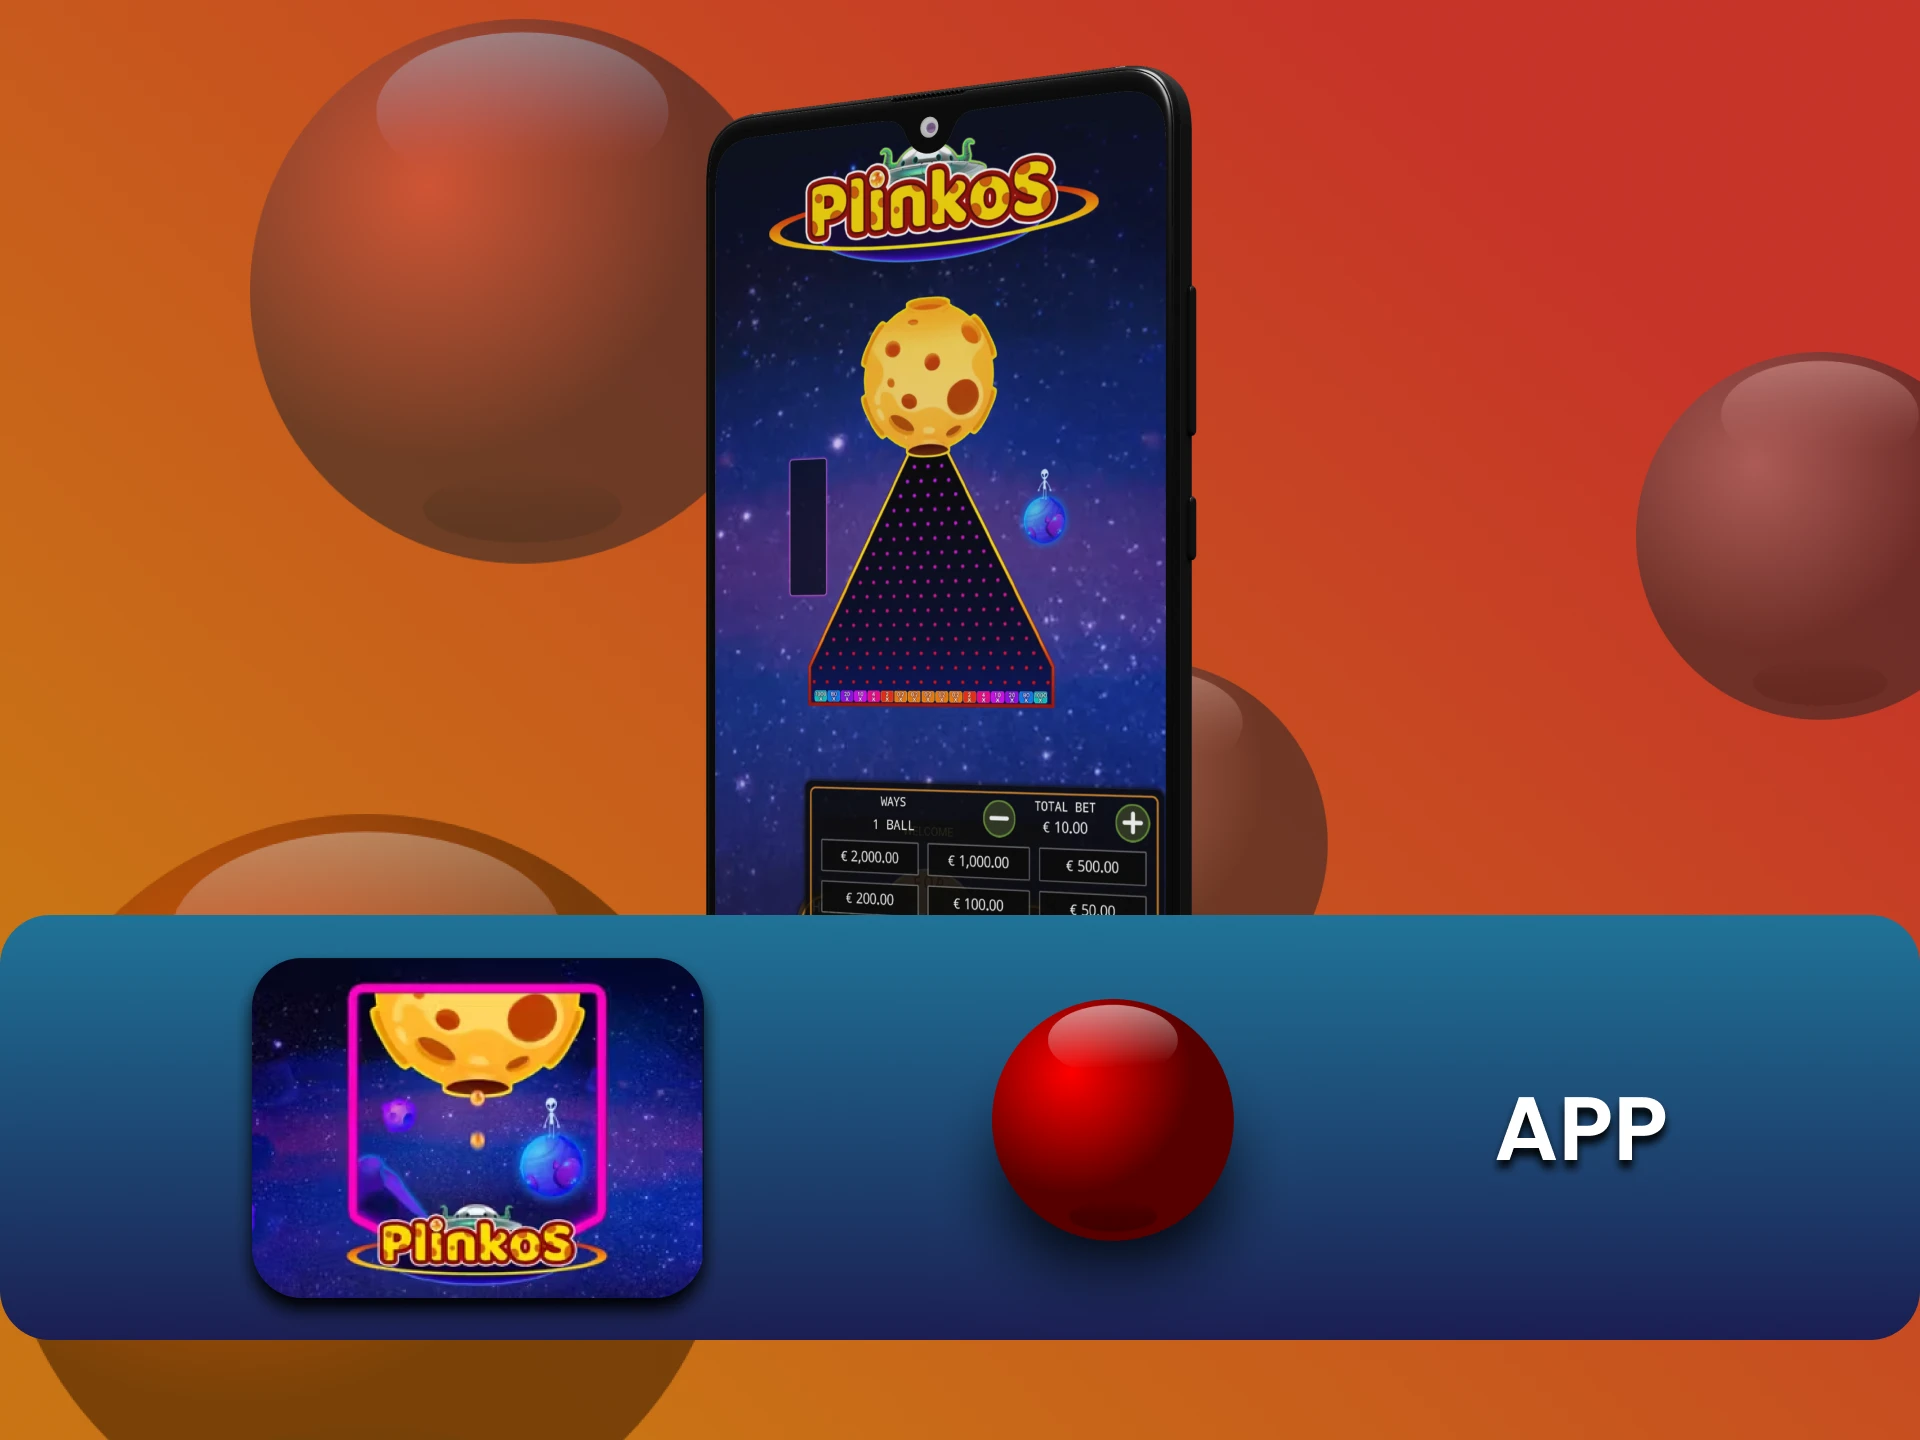 Download the application to play PlinkoS.